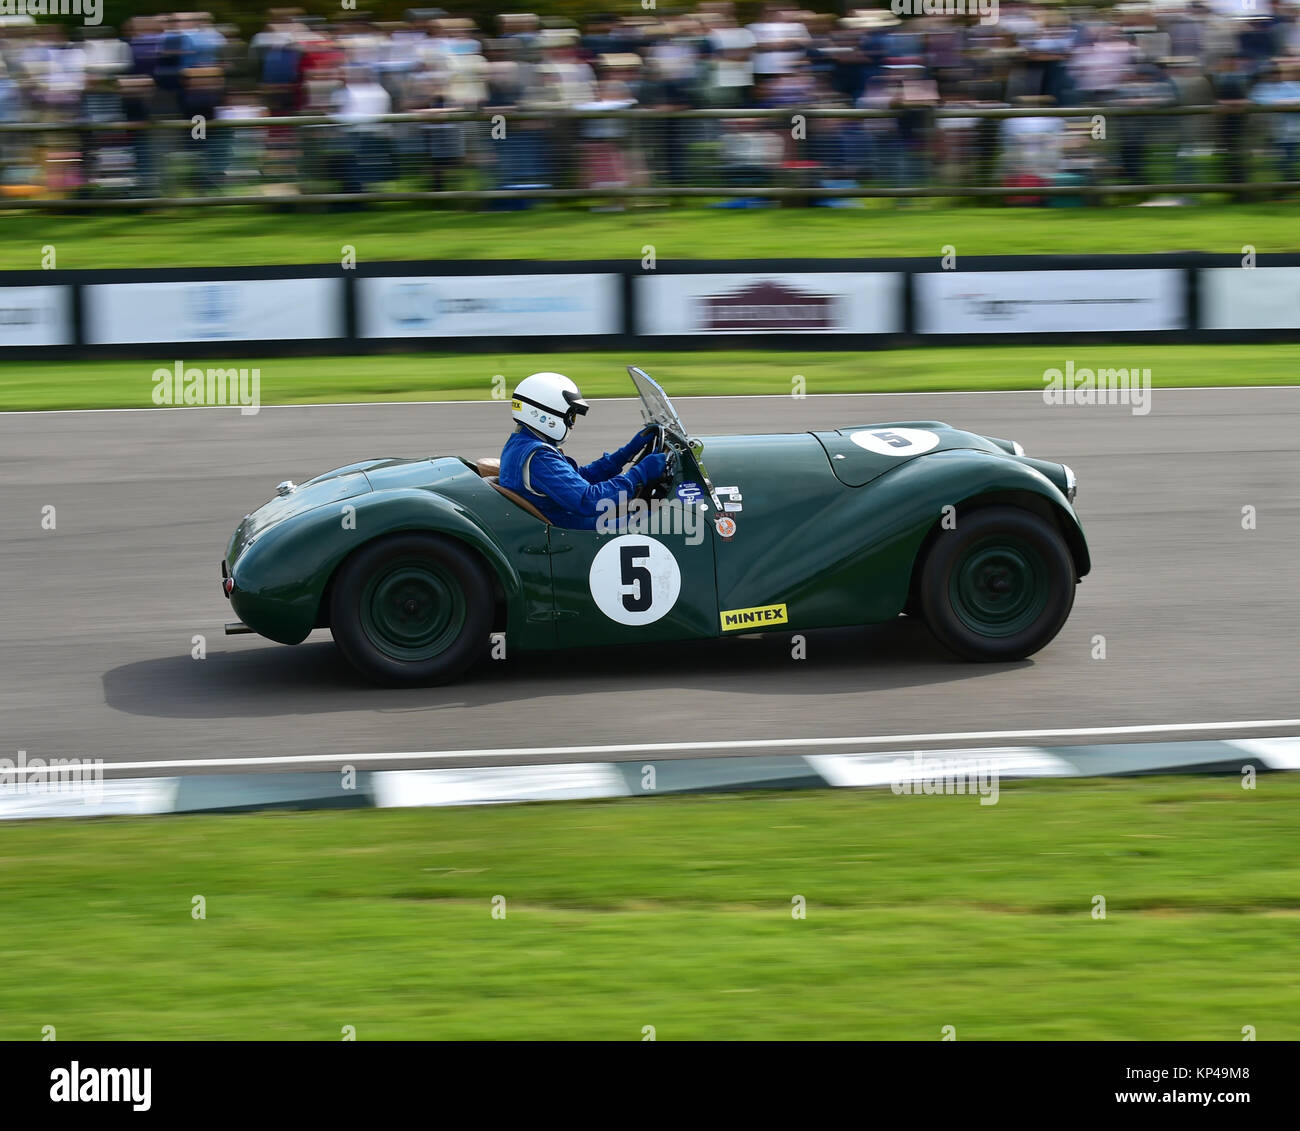 Guy Loveridge, Connaught L2, Fordwater Trophäe, Goodwood Revival 2015, 2015, classic cars, Goodwood, Goodwood Revival, Goodwood Revival 2015, historische Stockfoto